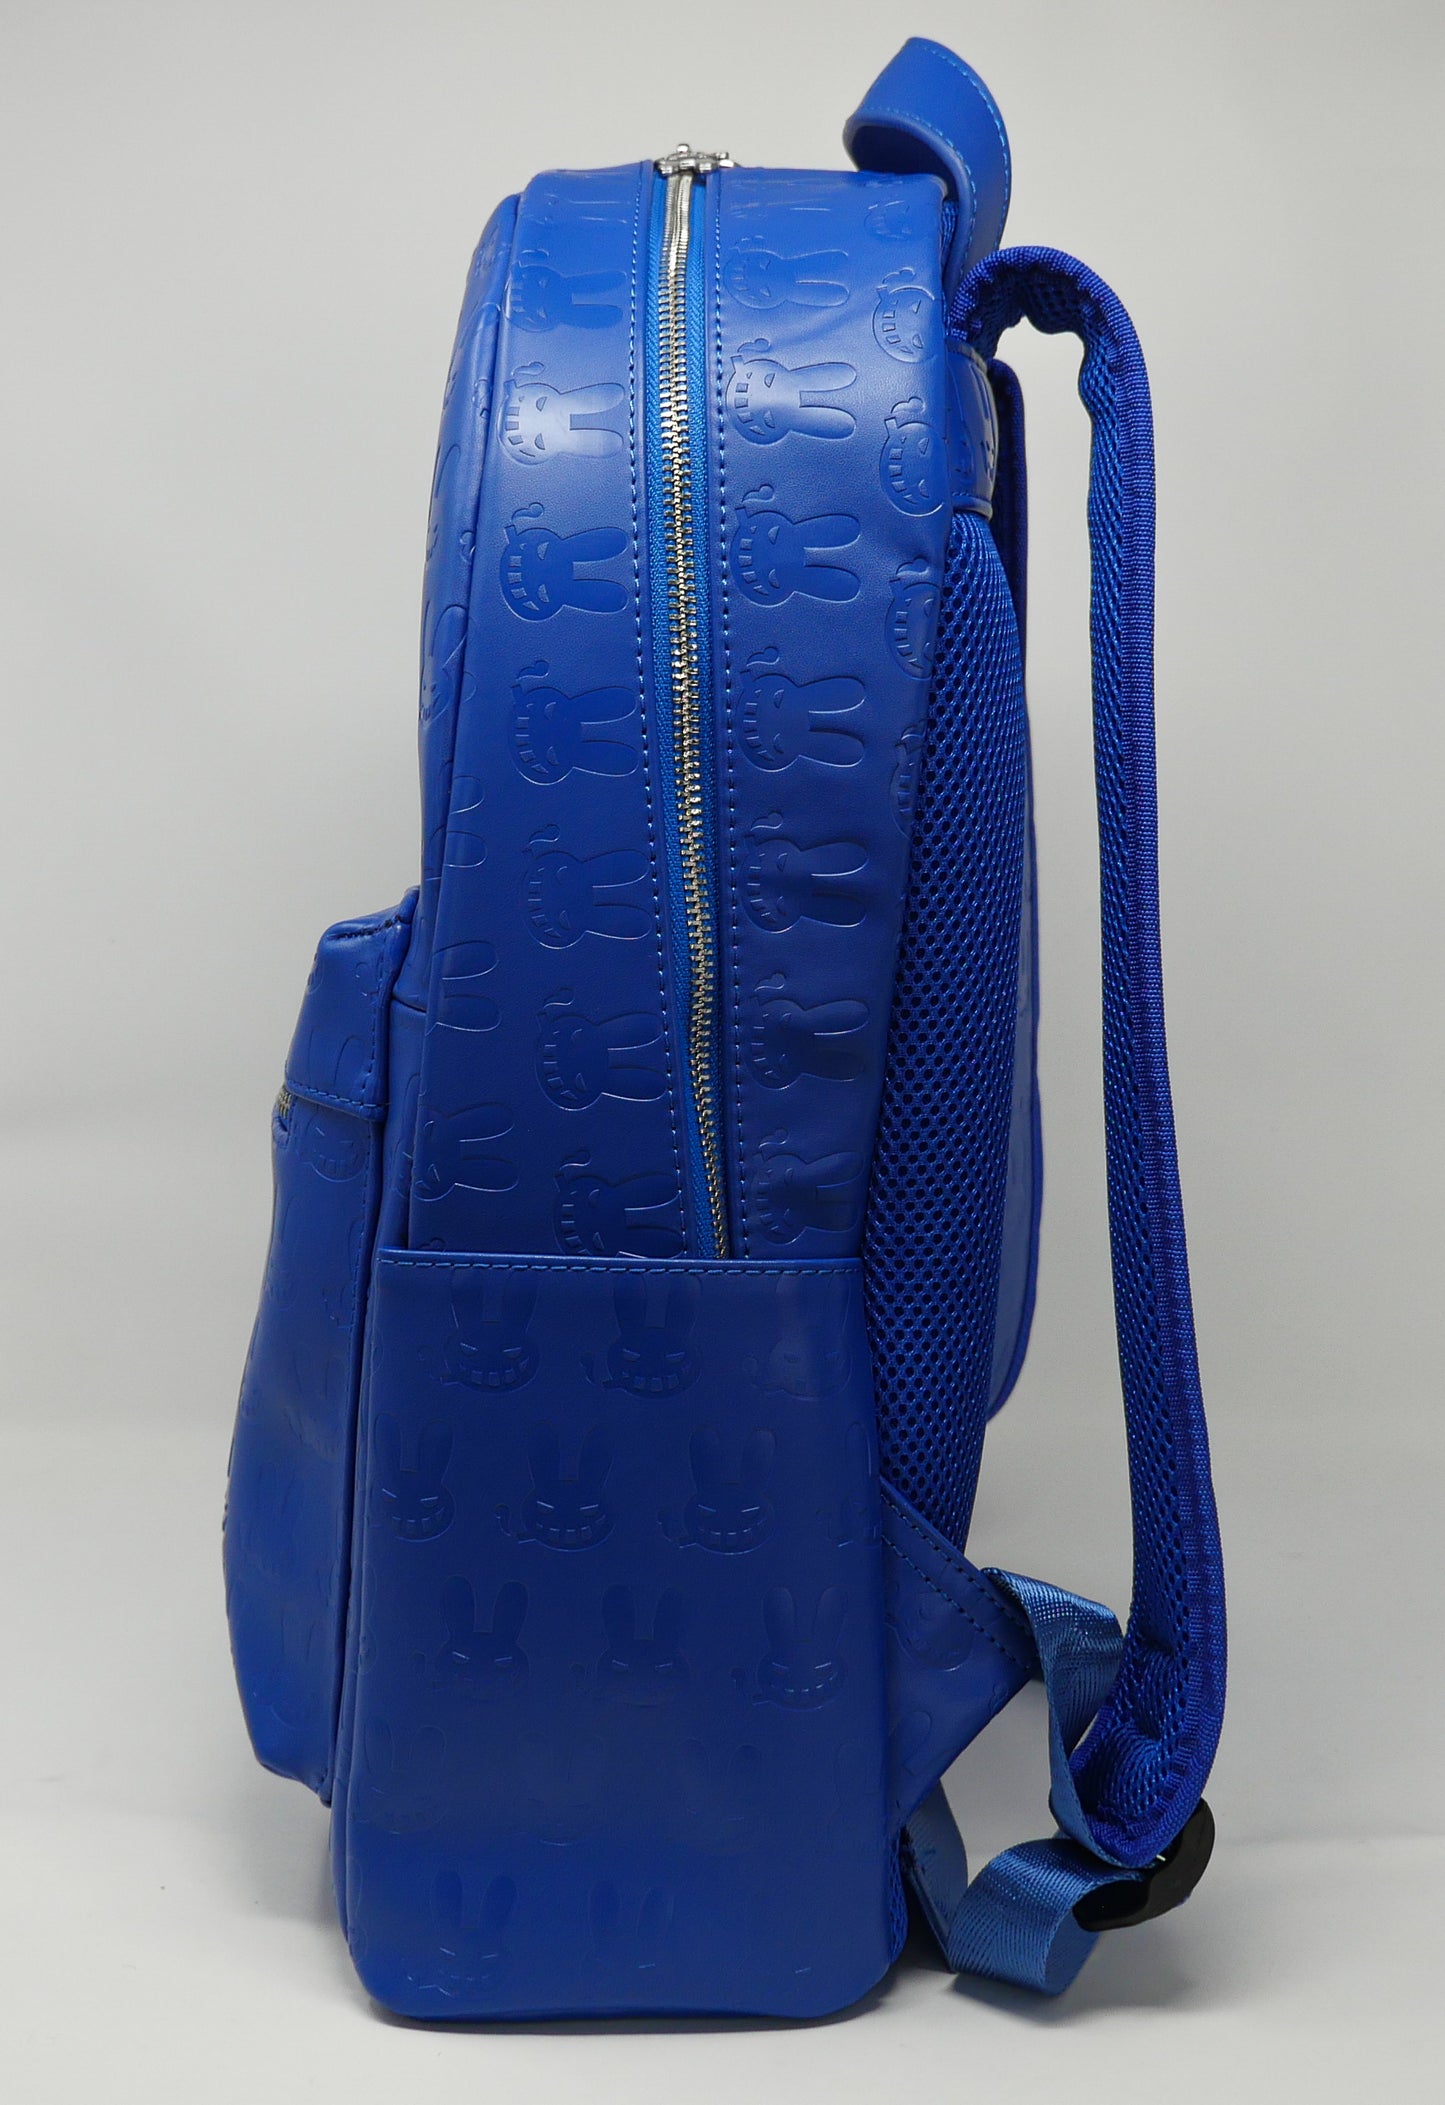 Dr. Zodiak’s Leather Backpack - Blue - Limited edition